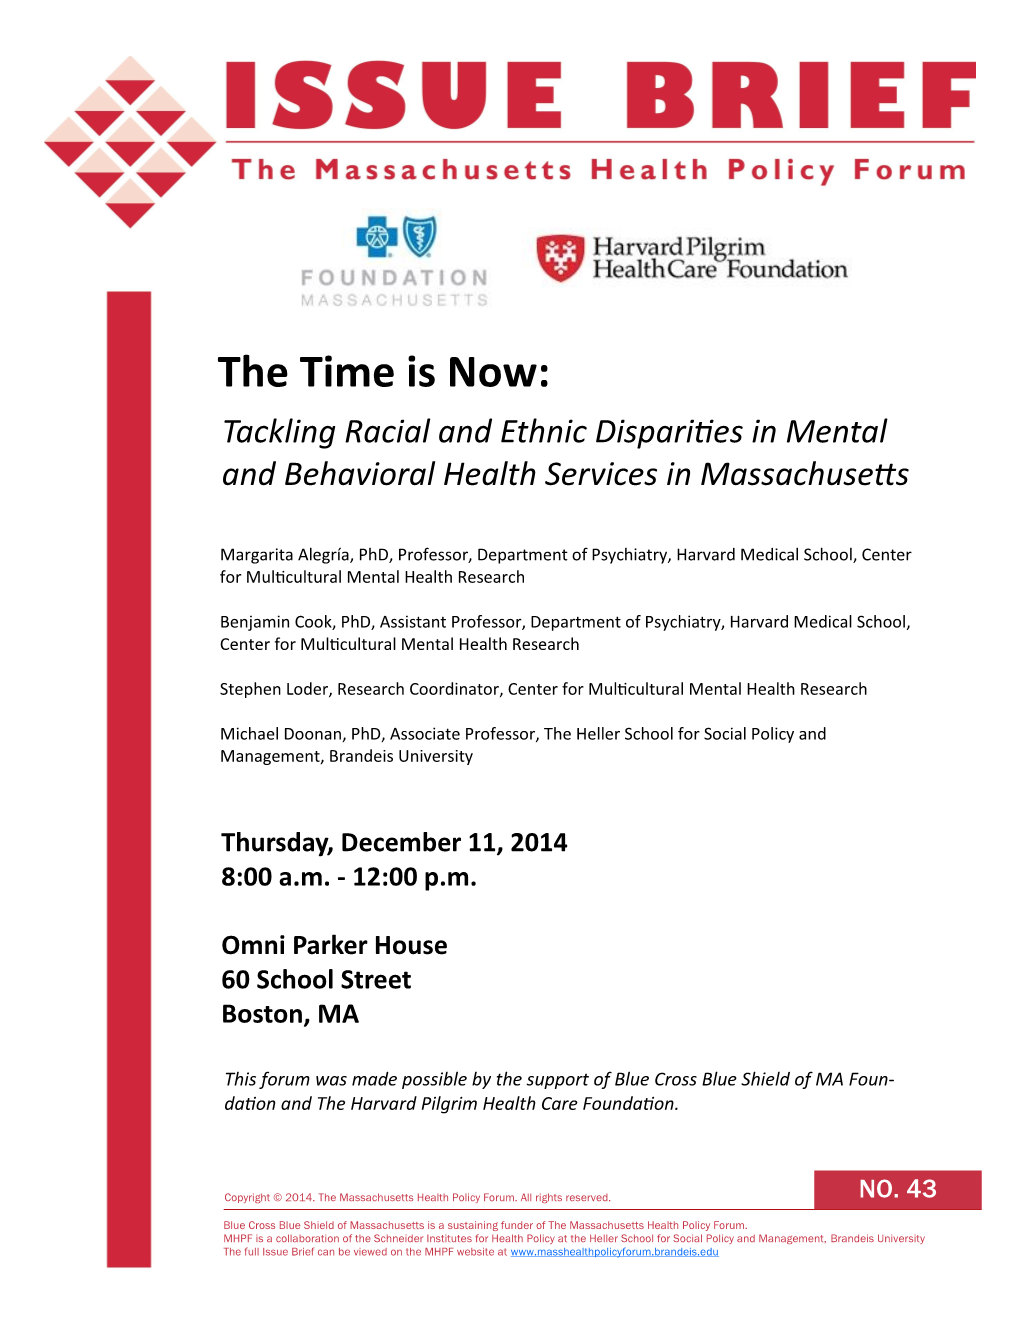 The Time Is Now: Tackling Racial and Ethnic Disparities in Mental Health